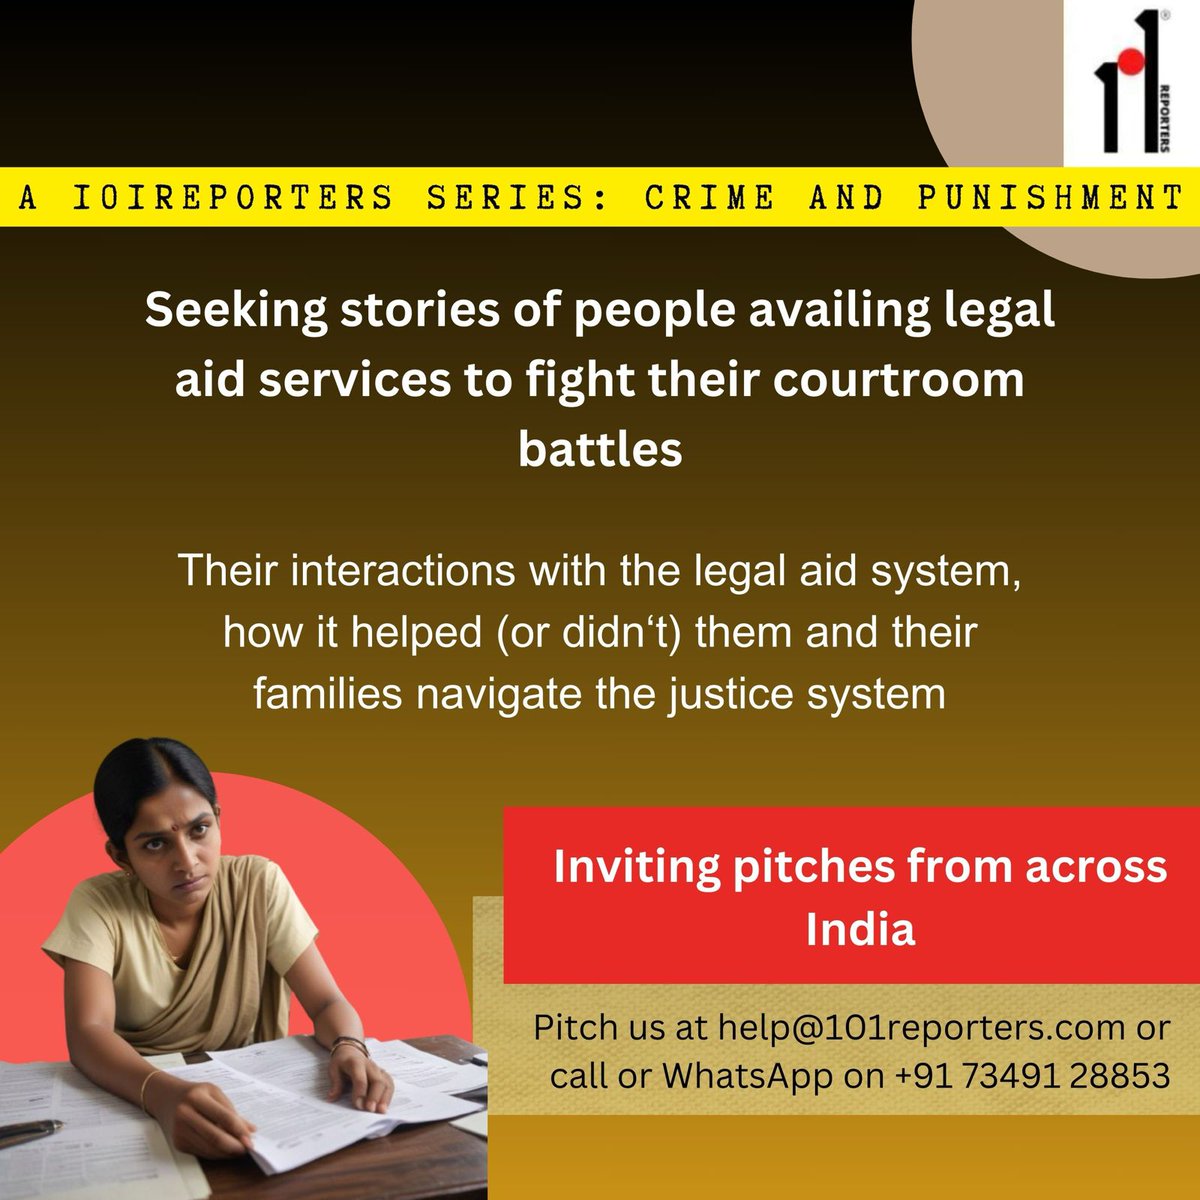 Seeking stories of individuals availing legal aid services to fight their courtroom battles under our 'Crime and Punishment' series Got a pitch for us? Get in touch! #callforpitches #callforjournalists